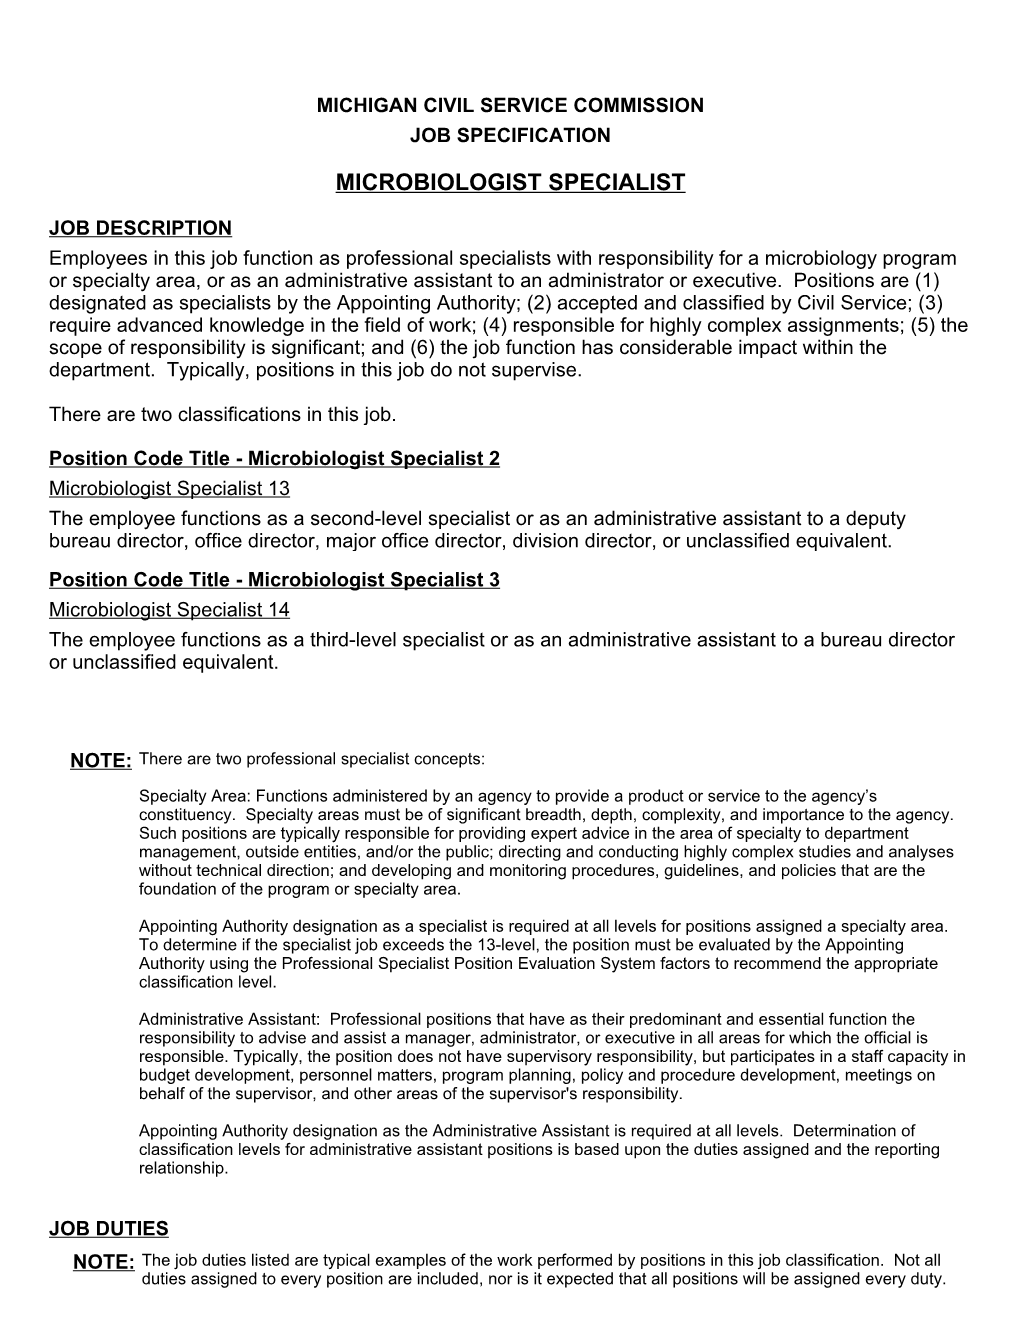 Microbiologist Specialist